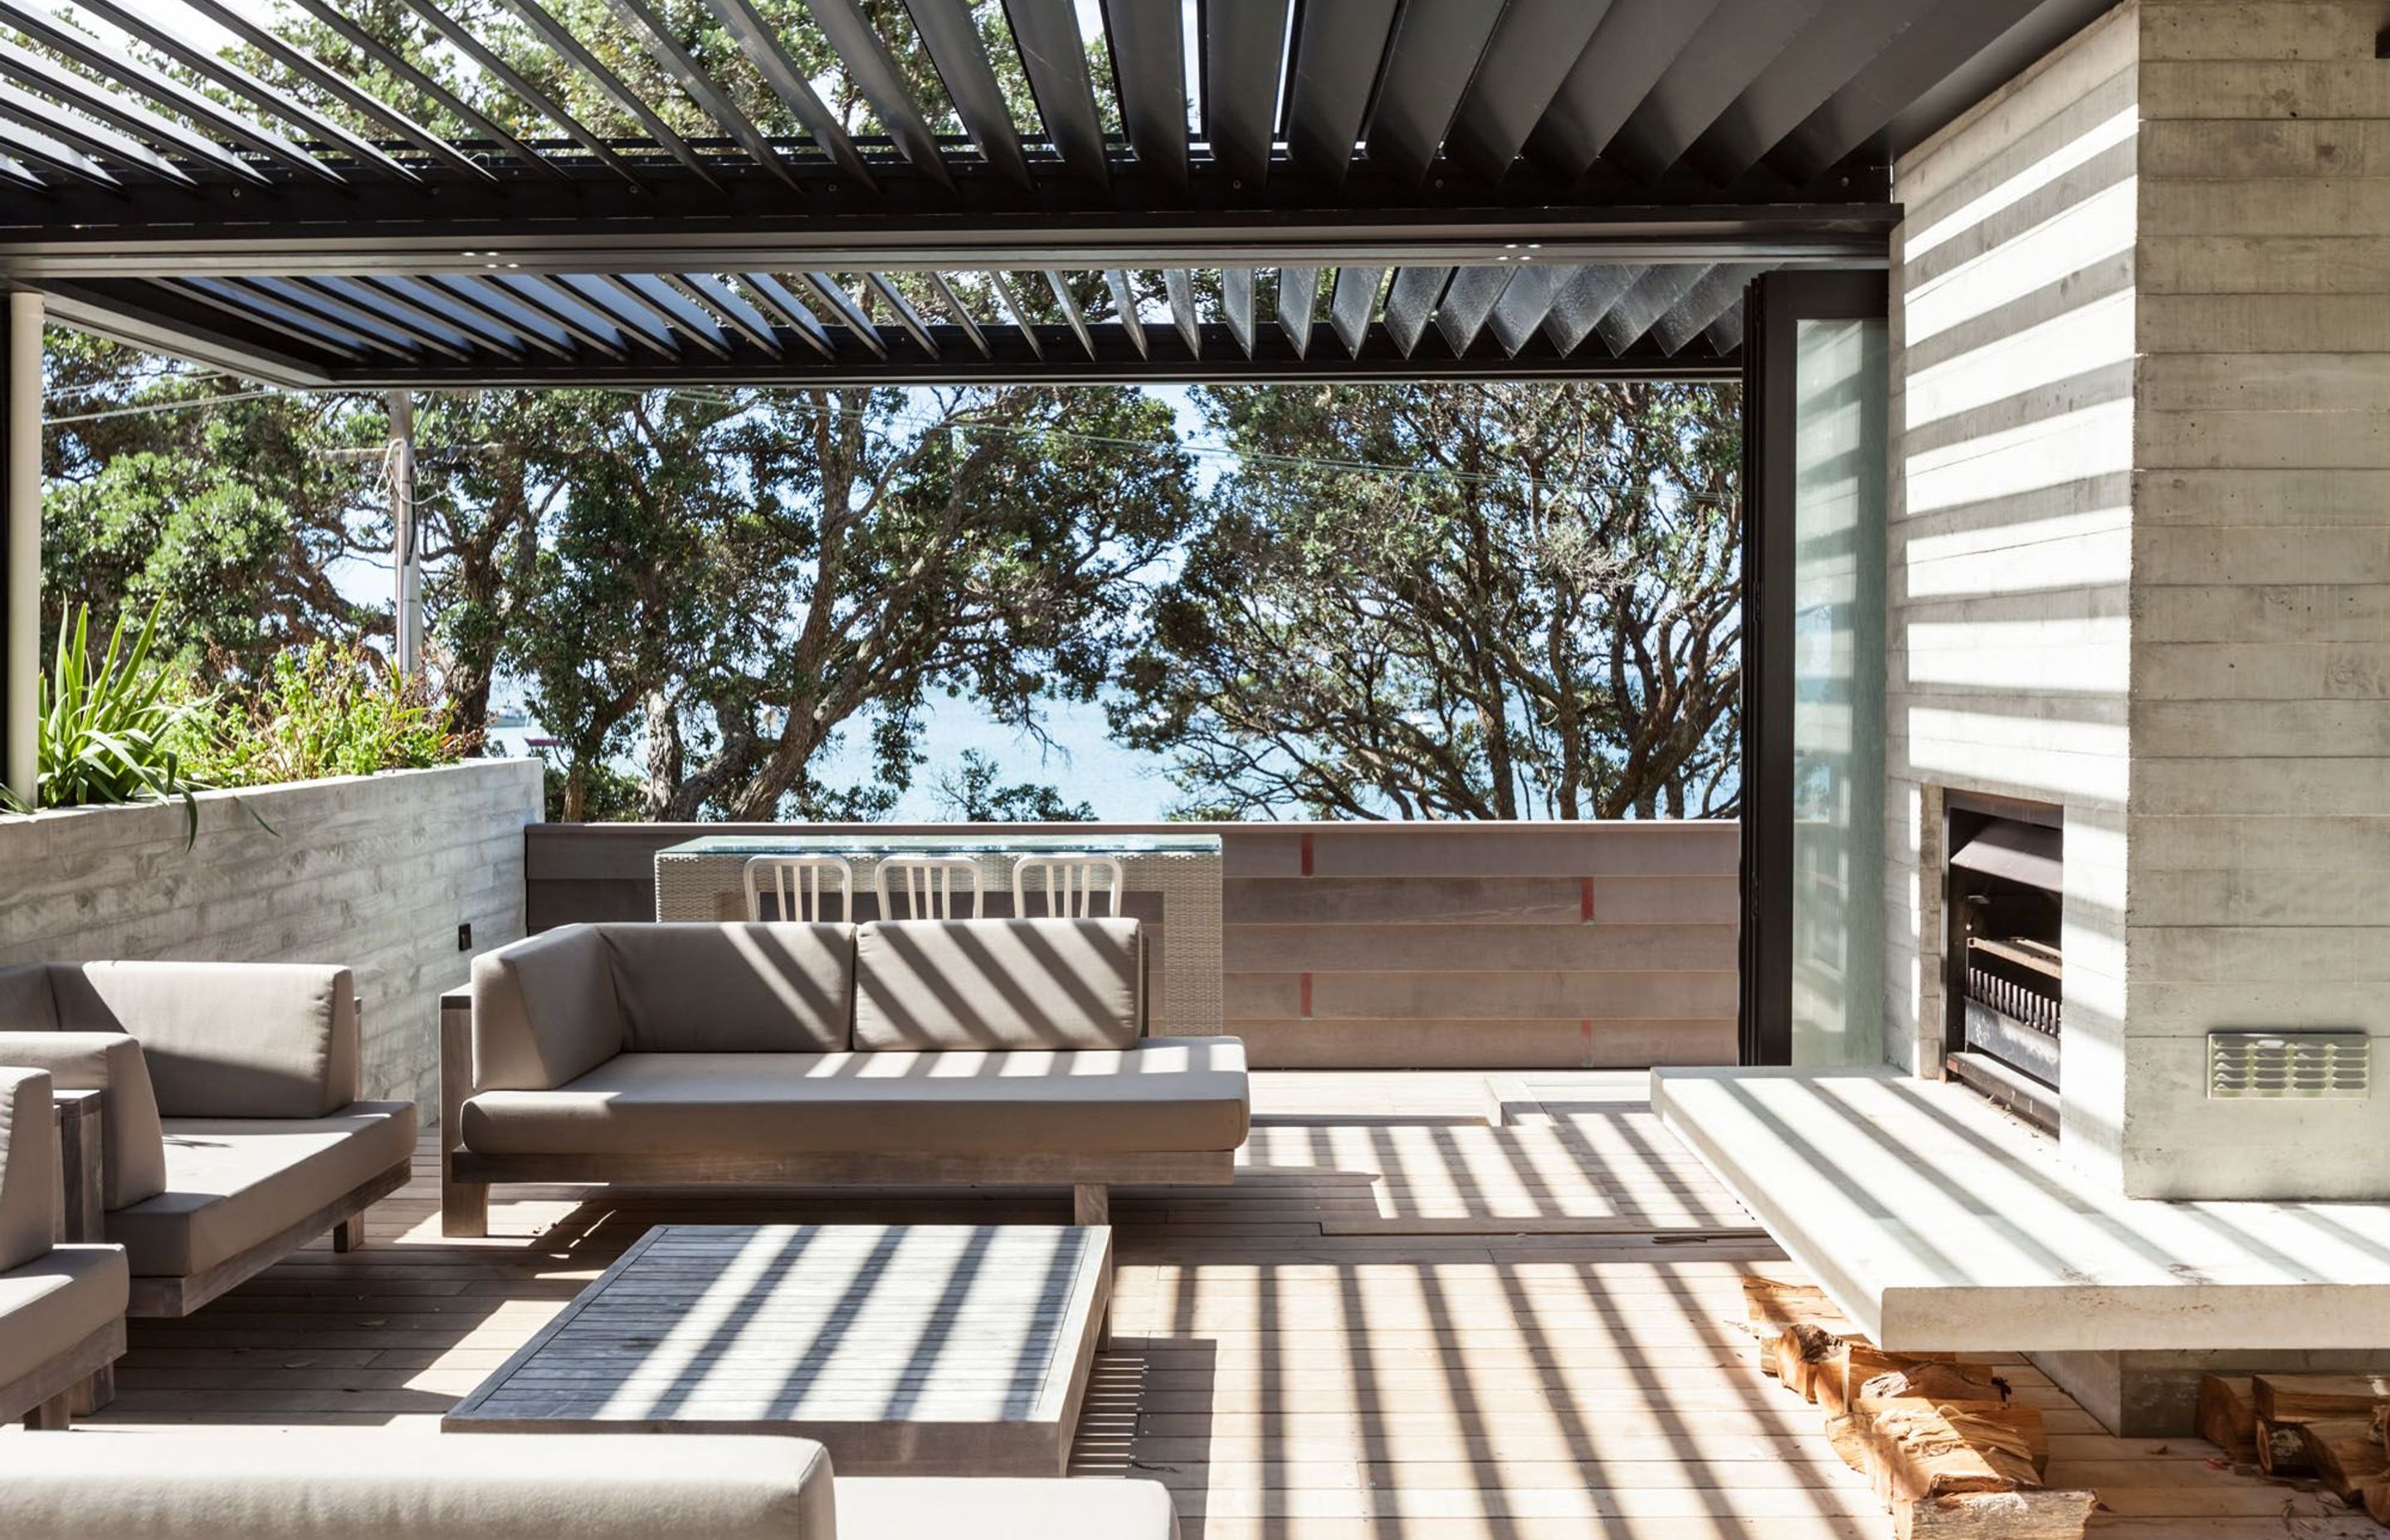 The RL200 Louvre Roof System from Locarno Louvres allows up to 85% sun and light to penetrate into the outdoor space and the adjacent indoor living spaces.